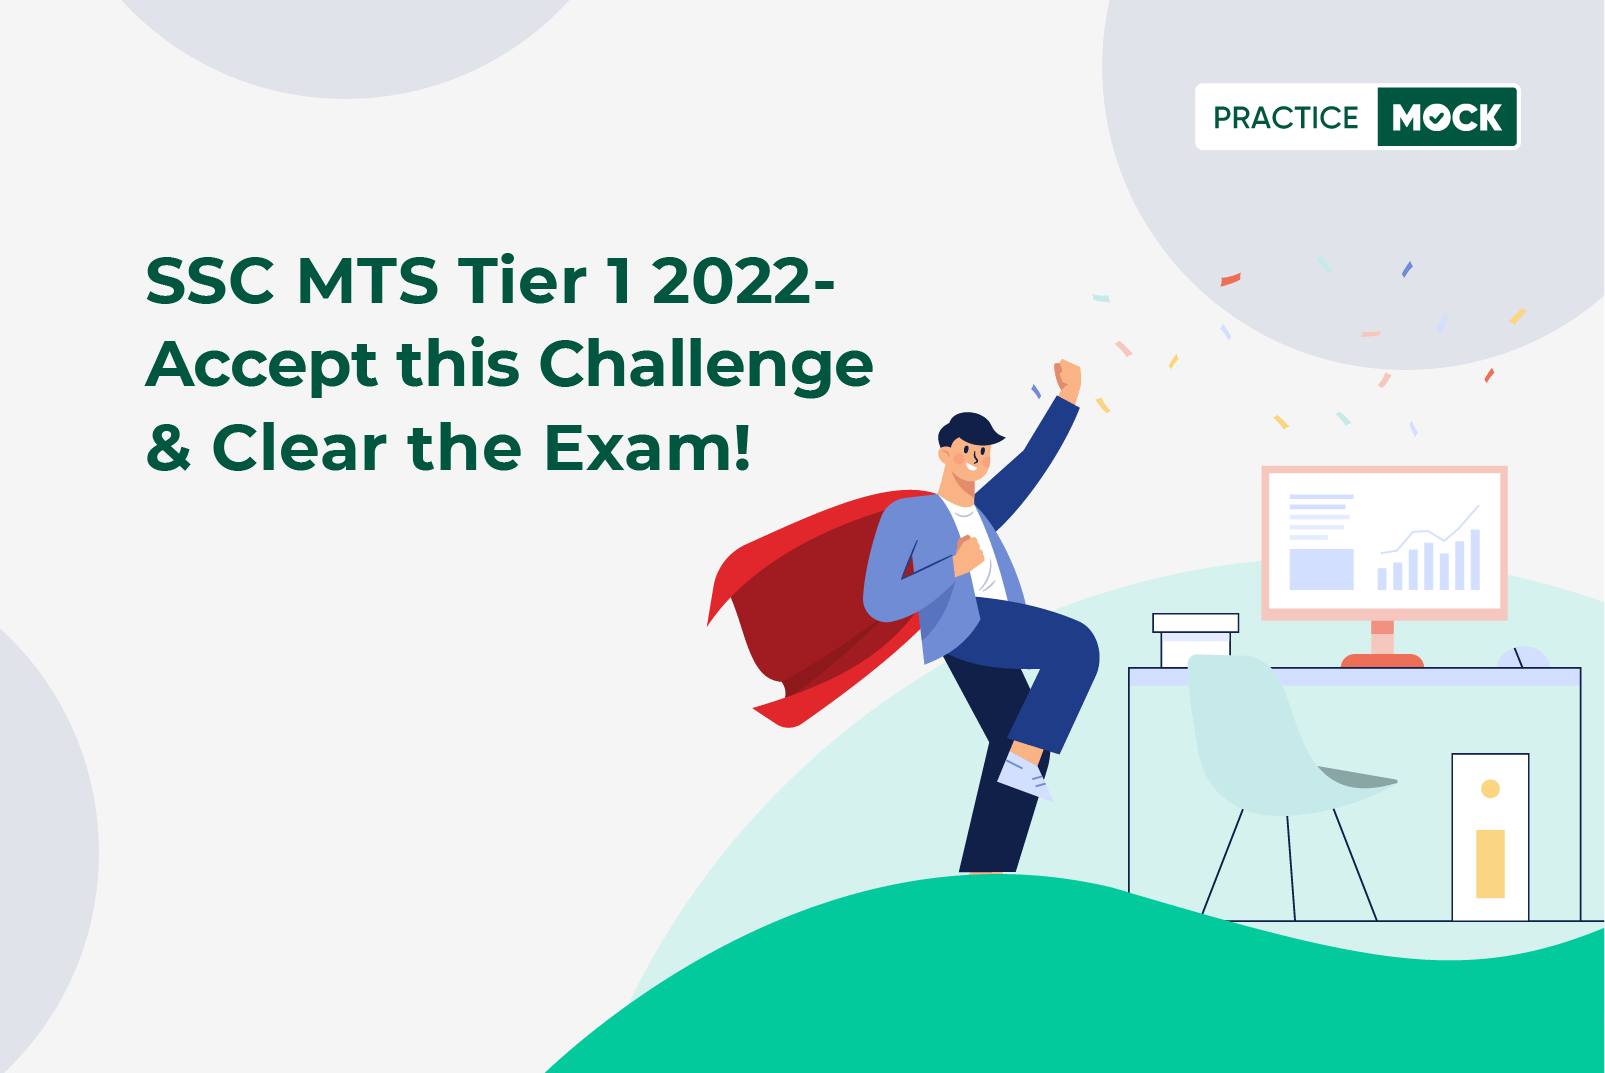 SSC MTS Tier 1 2022-11-Day Mock Test Challenge for Success